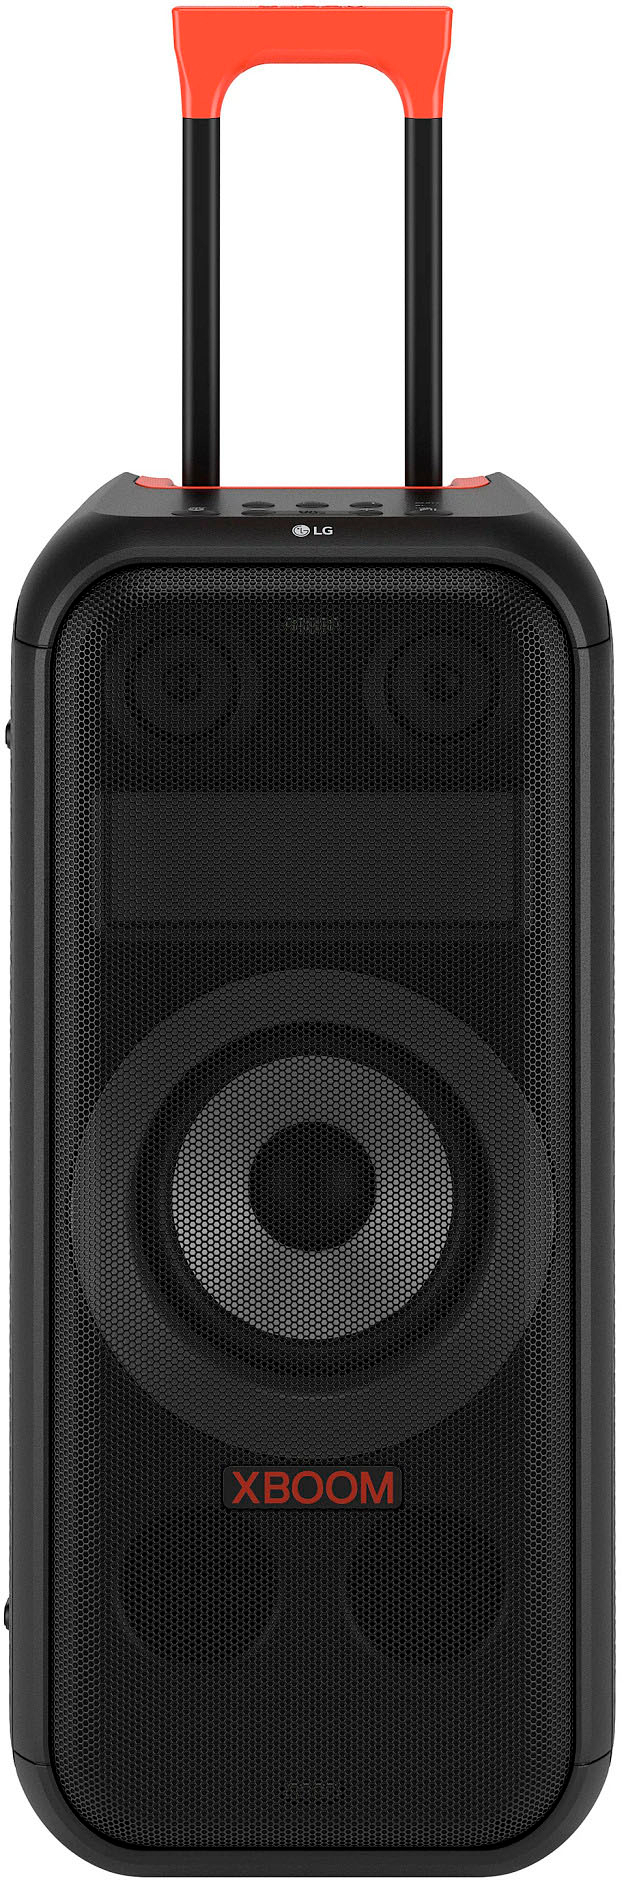 Buy - Portable XL7S Black LG Party with Pixel XBOOM Speaker LED XL7 Best Tower